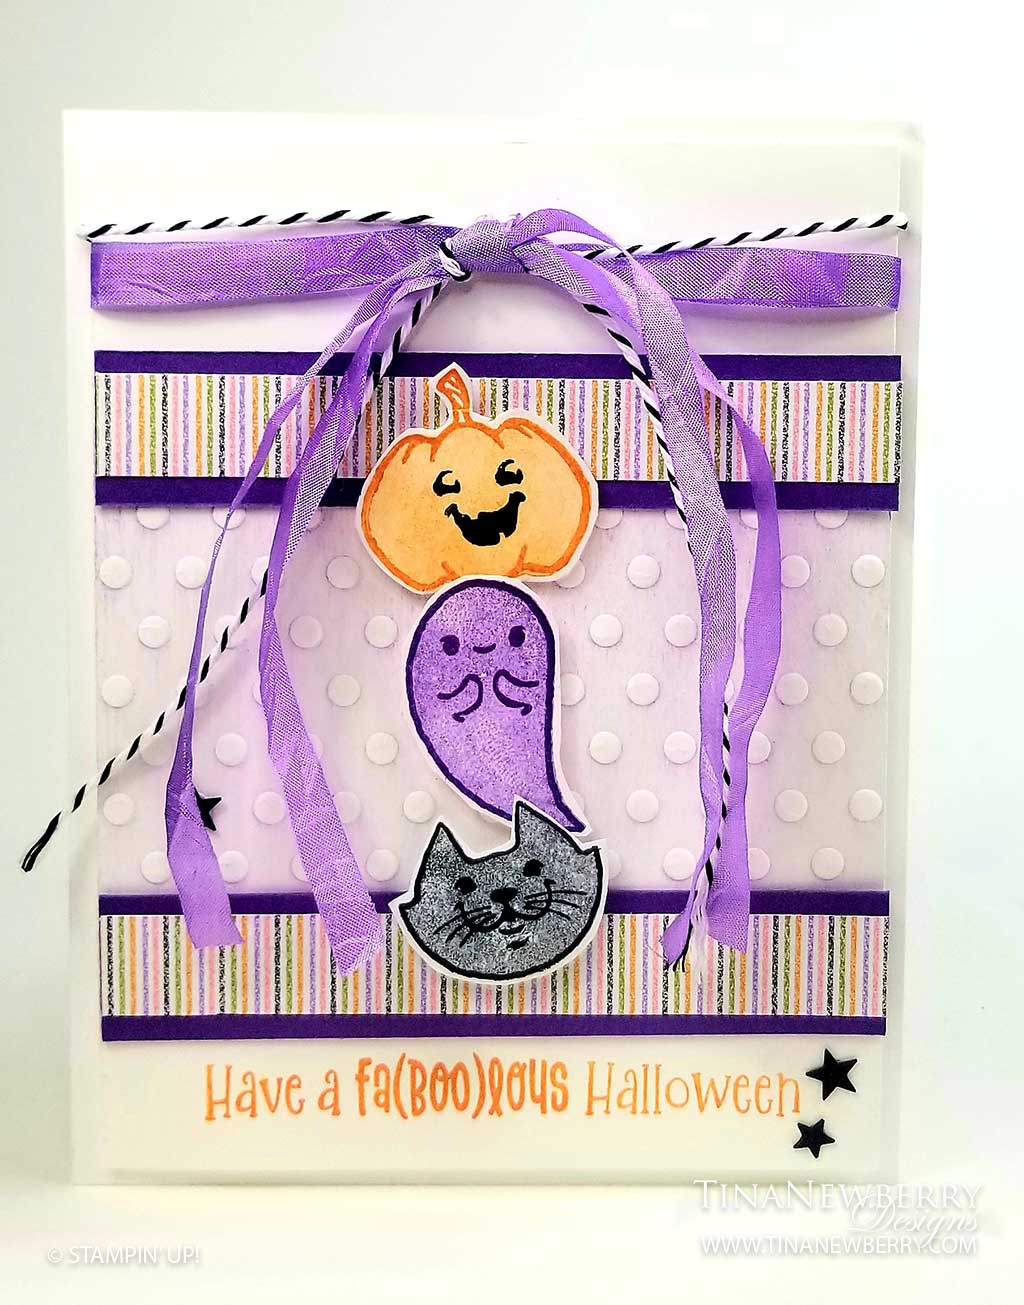 Have a Fab(BOO)lous Halloween